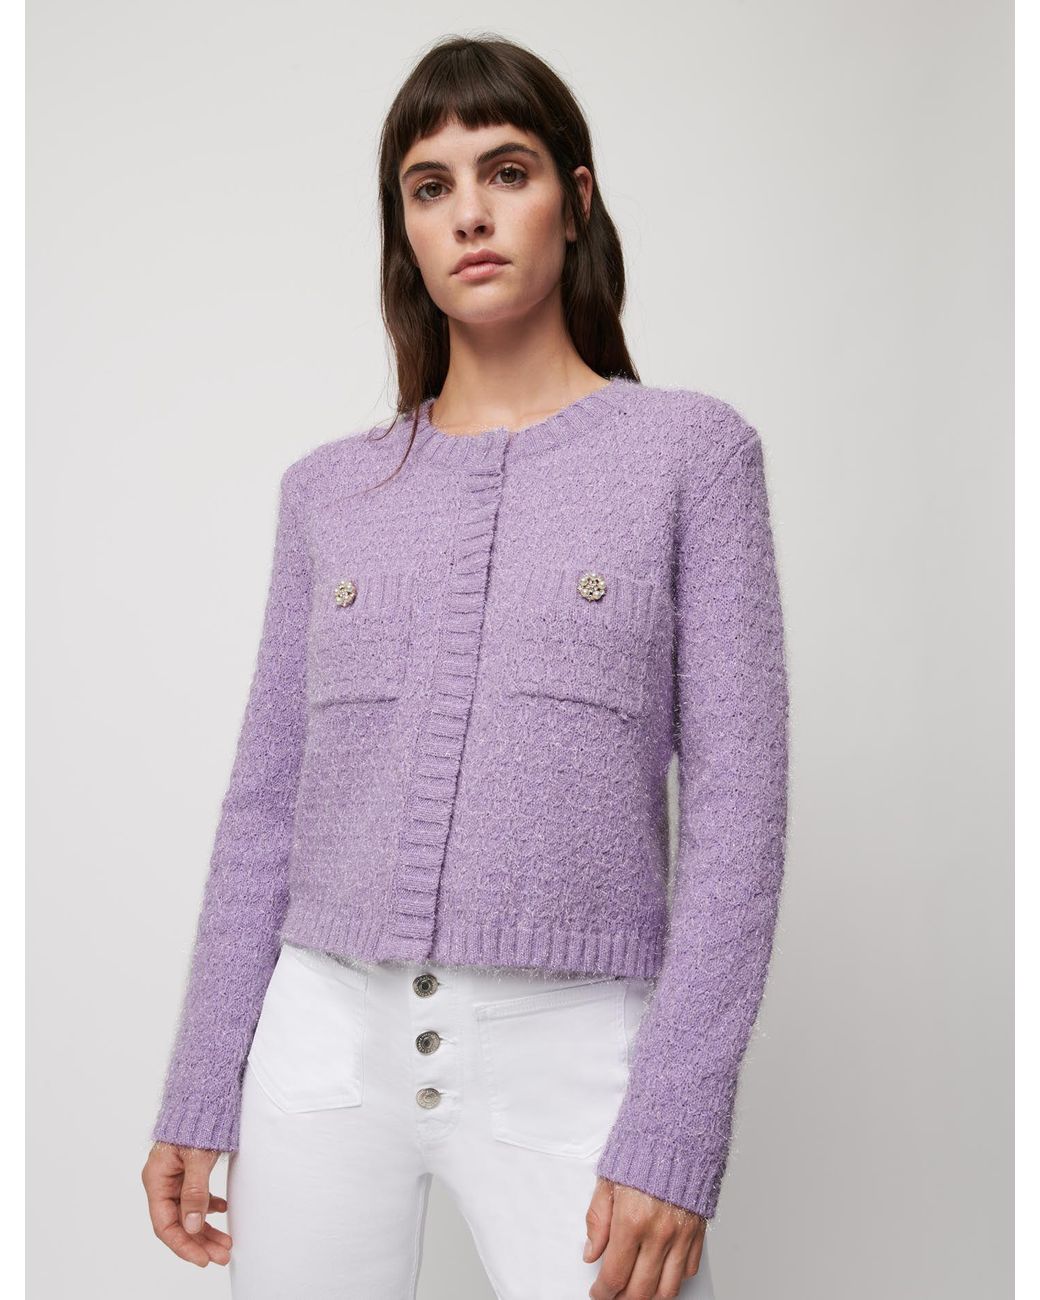 Maje Cardigan With Jewel Buttons in Purple | Lyst